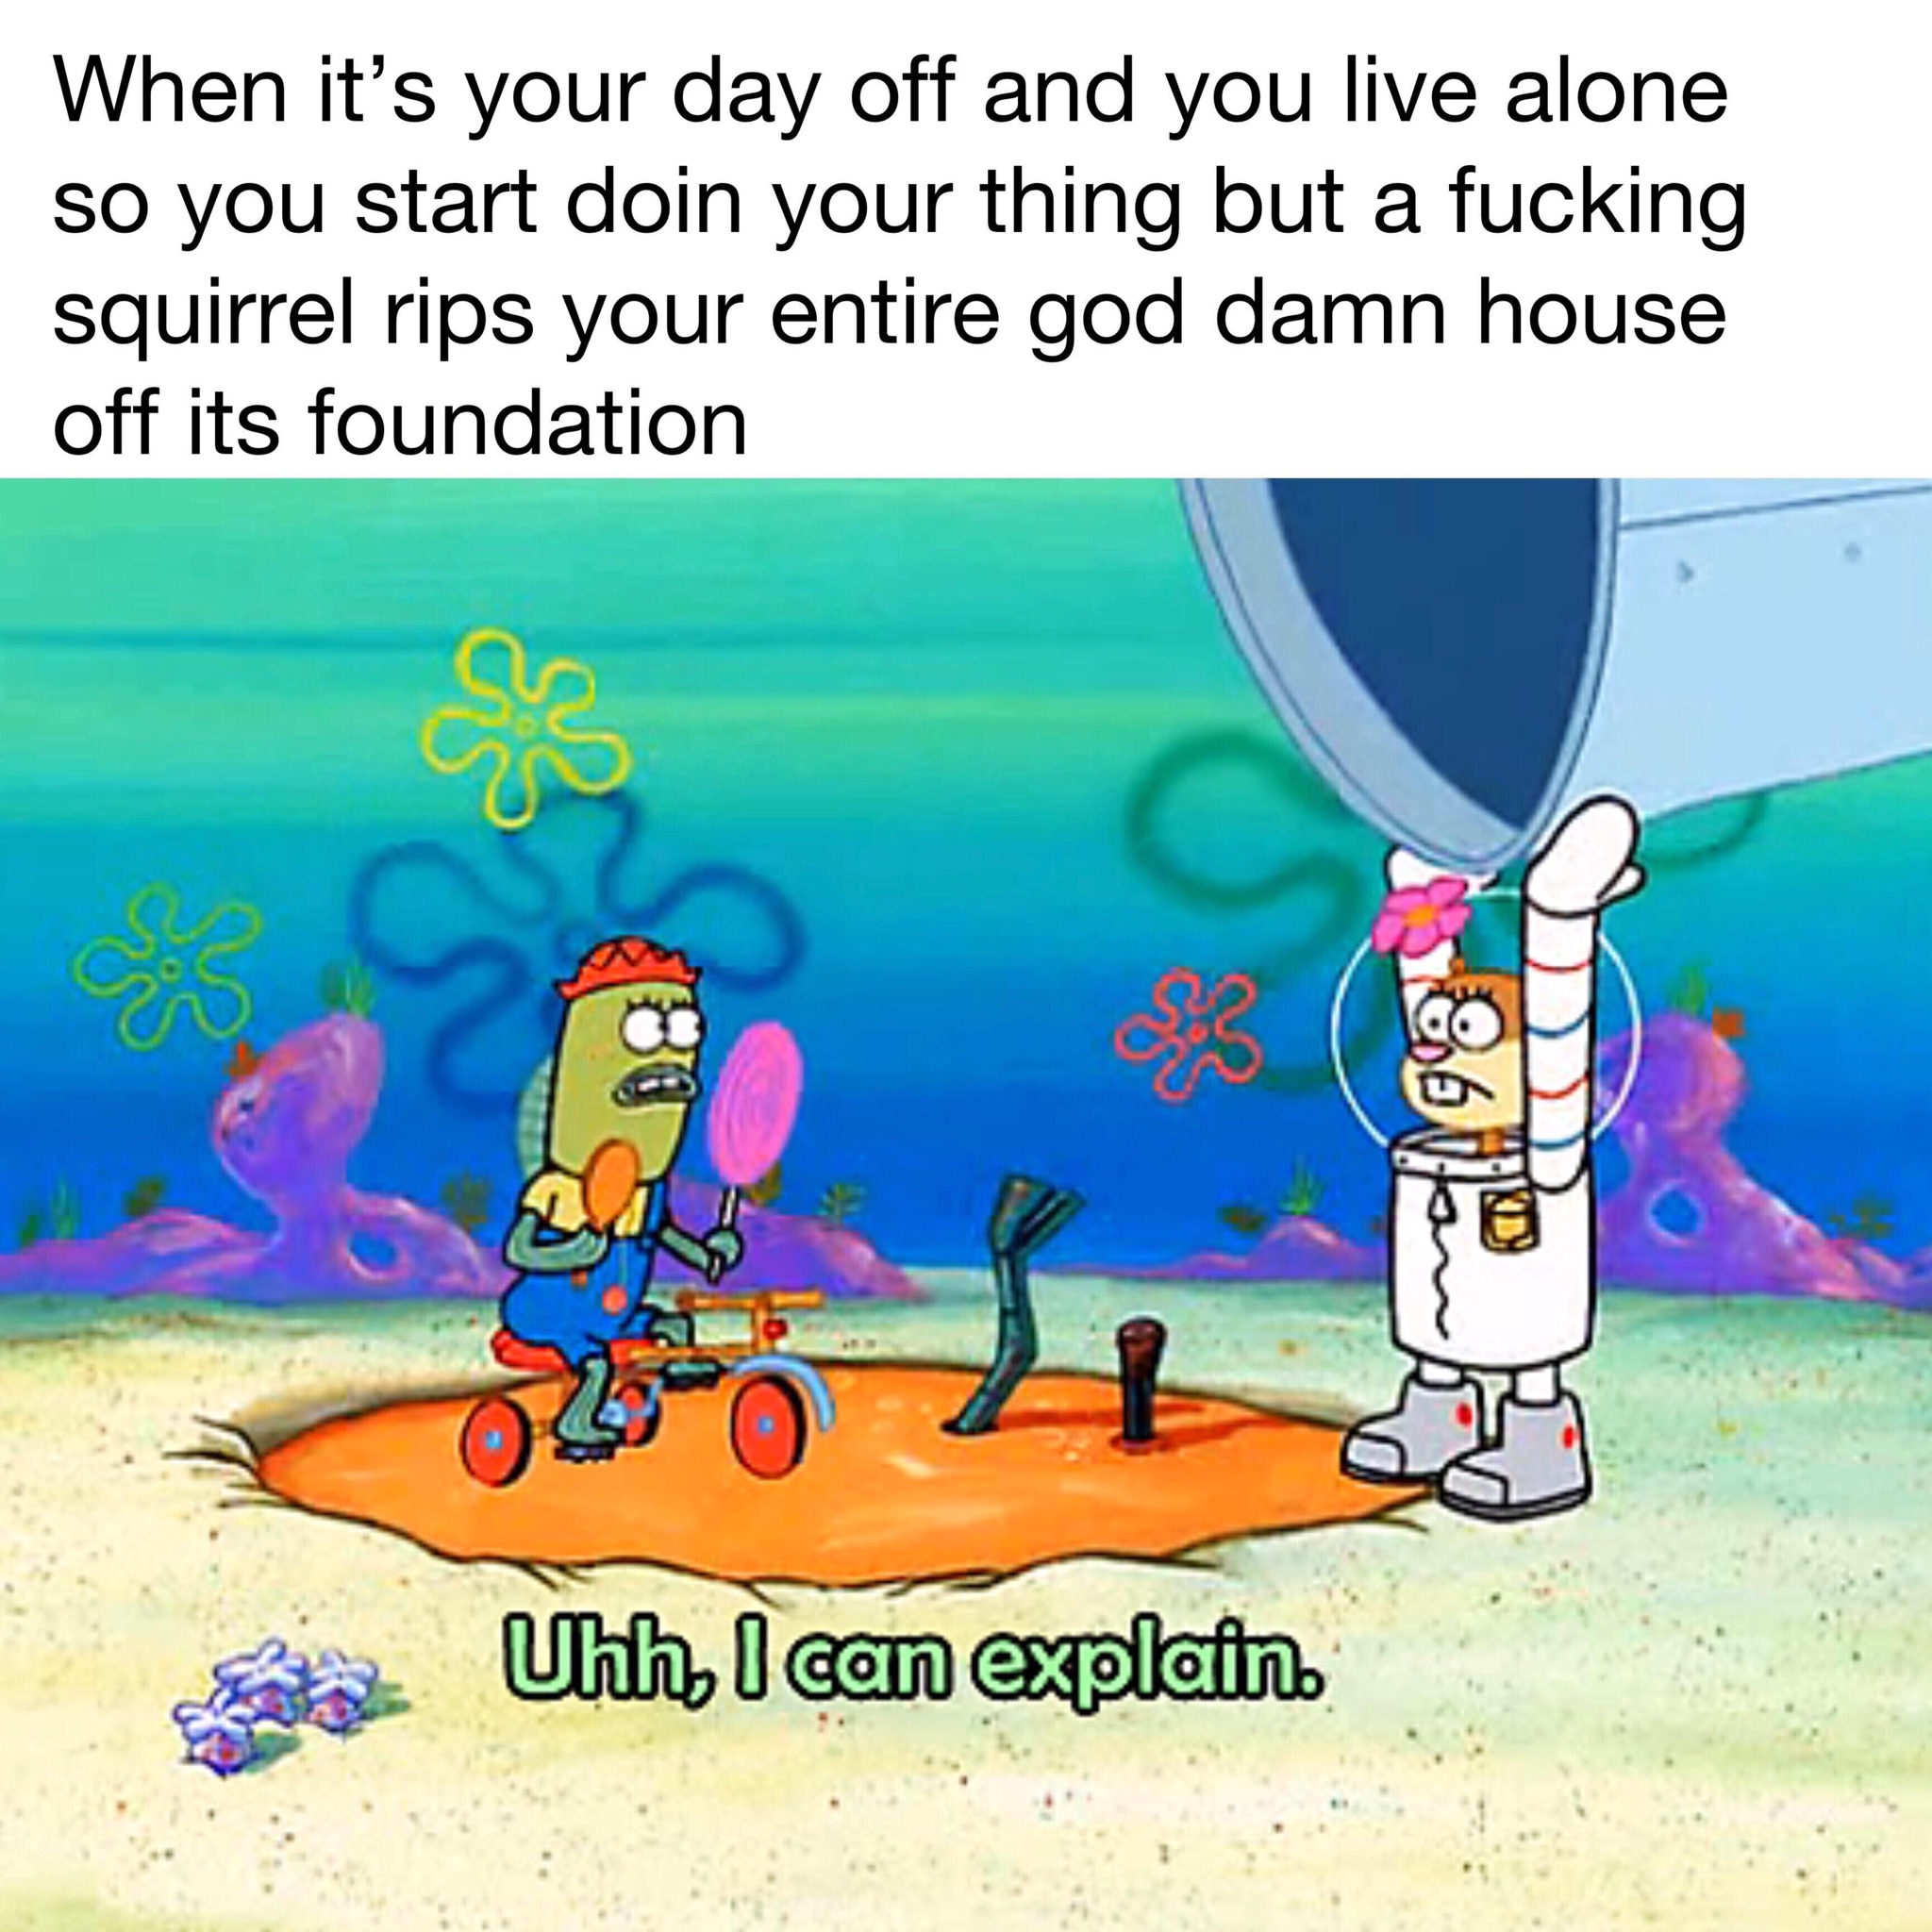 have several questions meme - When it's your day off and you live alone so you start doin your thing but a fucking squirrel rips your entire god damn house off its foundation Uhh I can explain